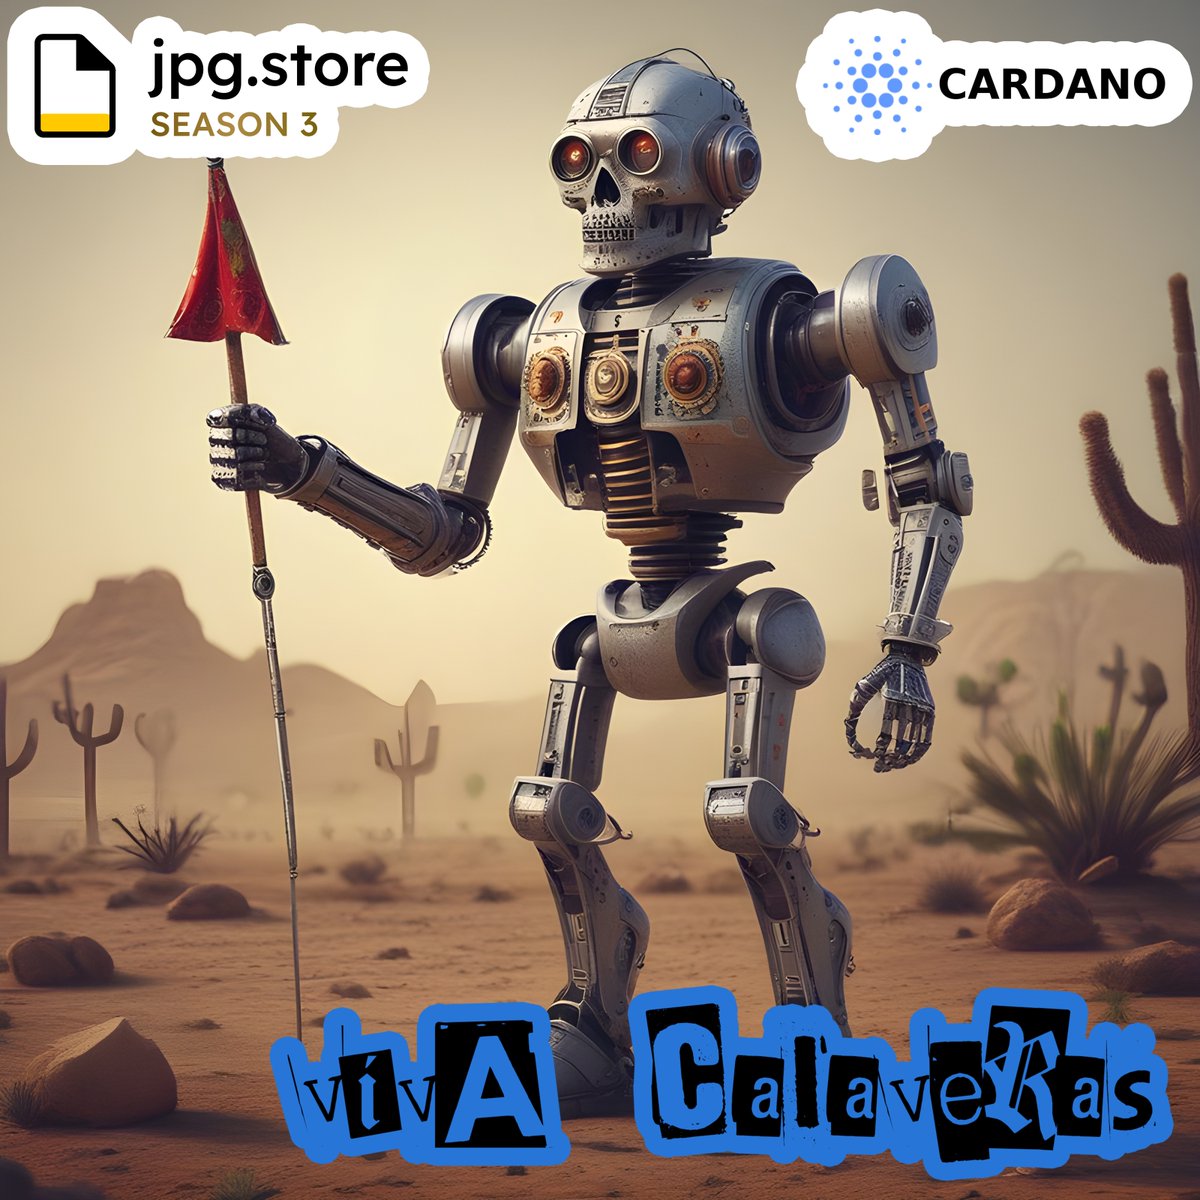 Viva Calaveras on Cardano via jpg.store ! These NFTs can be redeemed for a signed 3D printed K-SCOPES® Trading Card.

Pike
jpg.store/listing/226772…

#cardano #ADA #CardanoNFT #CardanoCommunity #NFT #vivacalaveras #calaveras #kscopes #tradingcards #3dprinting #AI